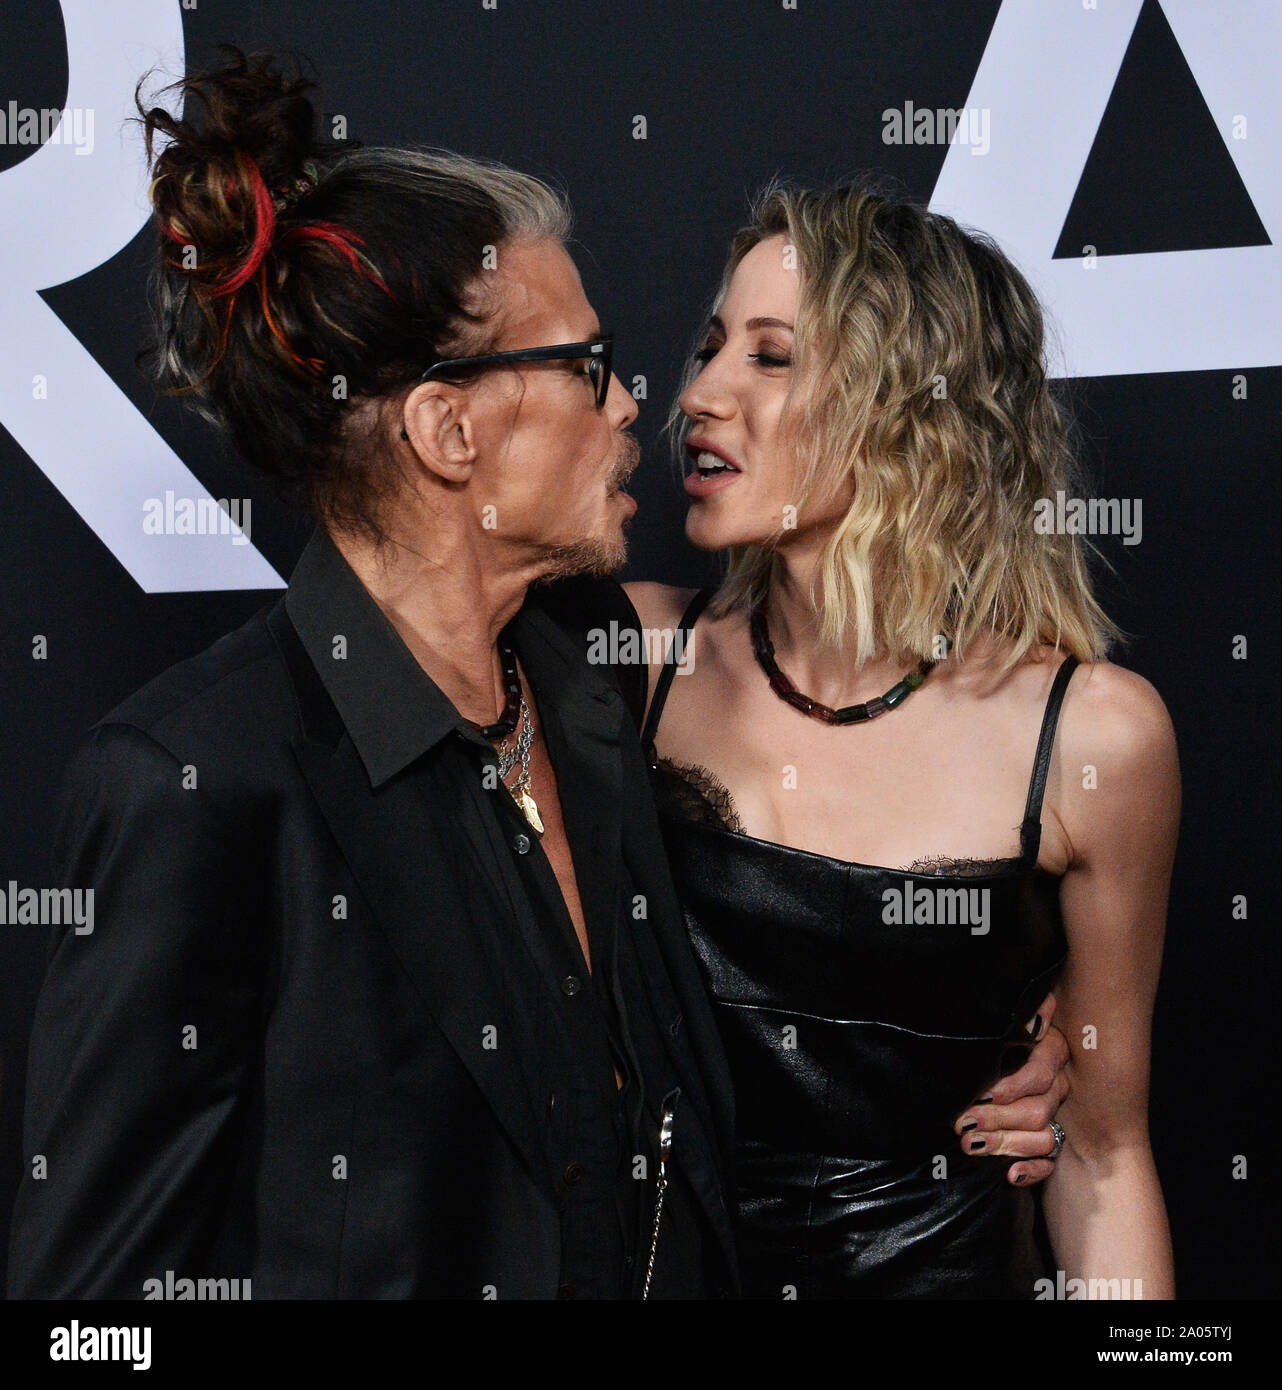 Aerosmith lead singer Steven Tyler and his girlfriend Aimee Preston attend the premiere of the motion picture sci-fi thriller 'Ad Astra' at the ArcLight Cinerama Dome in the Hollywood section of Los Angeles on Wednesday, September 18, 2019. Storyline: Astronaut Roy McBride (Brad Pitt) travels to the outer edges of the solar system to find his missing father and unravel a mystery that threatens the survival of our planet. His journey will uncover secrets that challenge the nature of human existence and our place in the cosmos.  Photo by Jim Ruymen/UPI Stock Photo